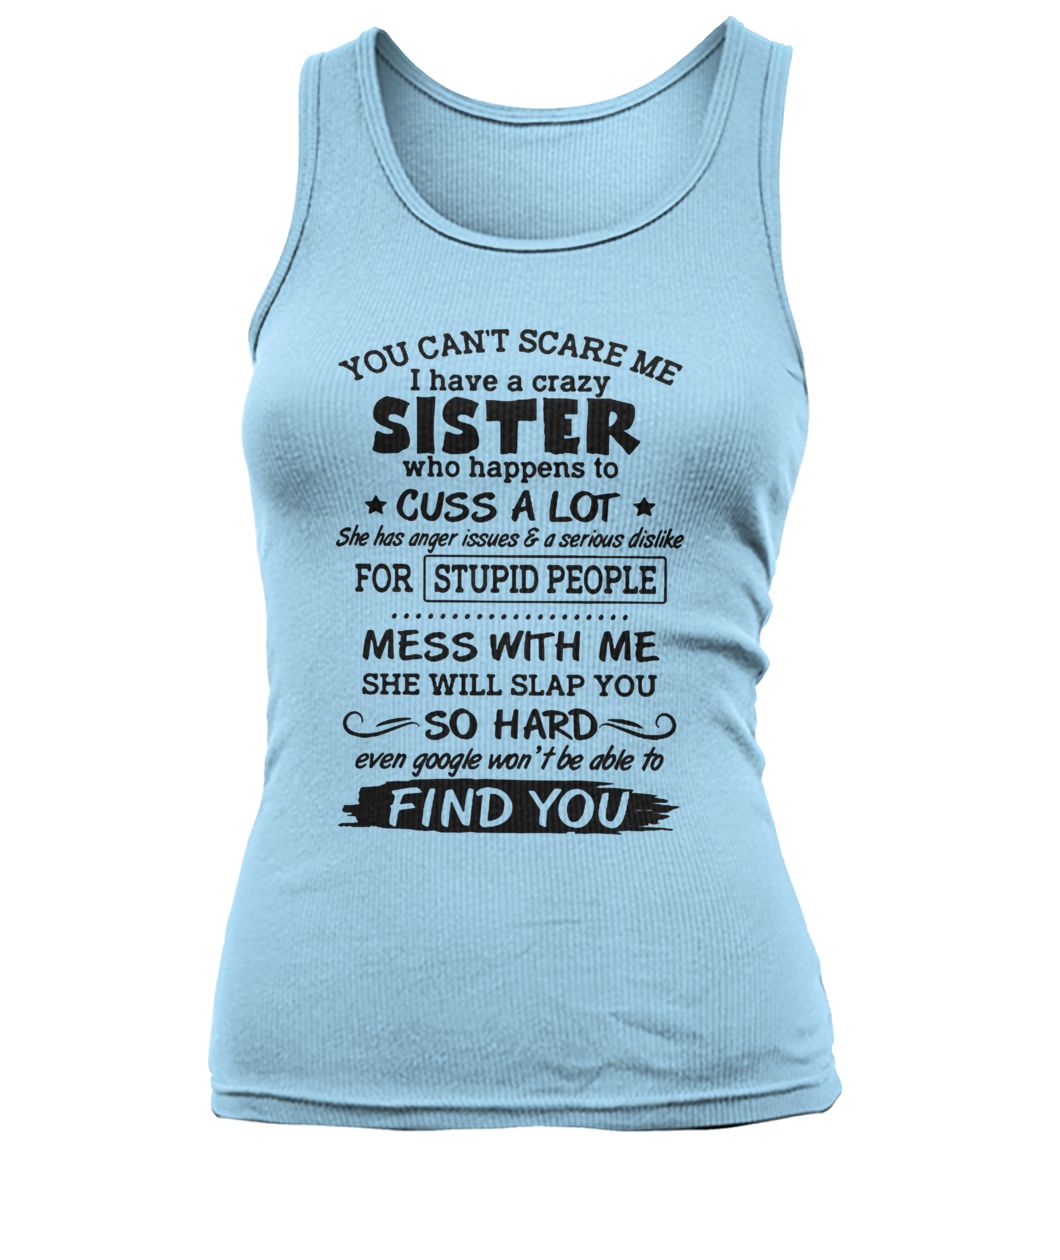 You cant scare me I have a crazy sister who happens to cuss a lot women's tank top